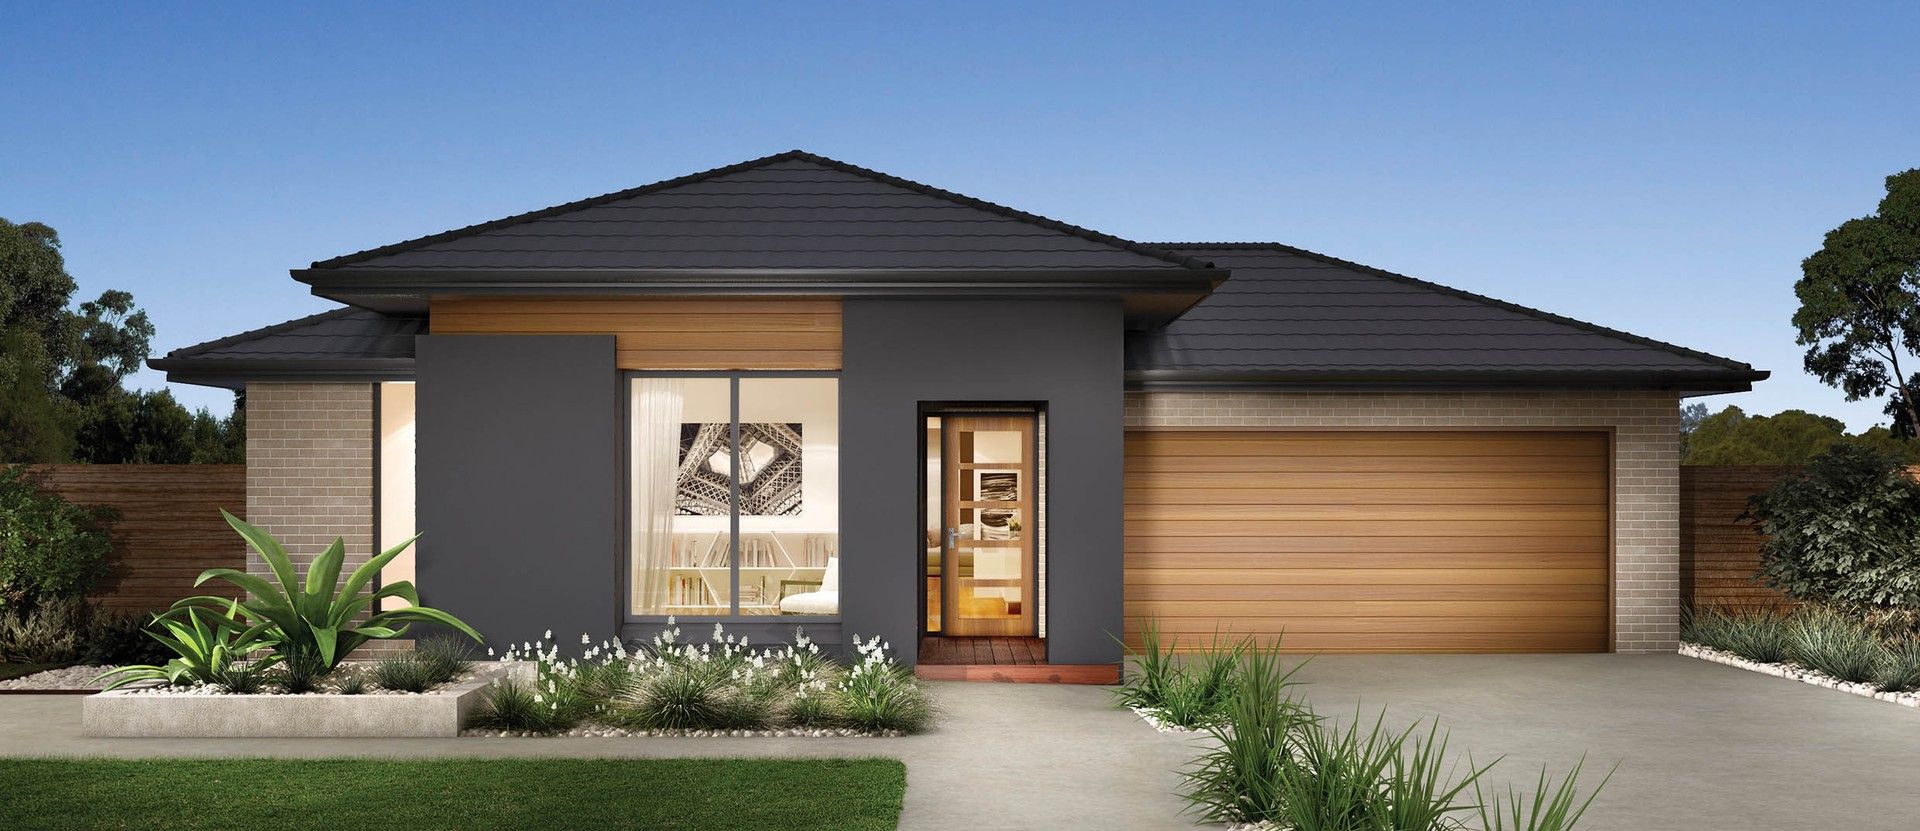 3 bedrooms New House & Land in Chance Way Clyde North, Lot: 344 CLYDE VIC, 3978